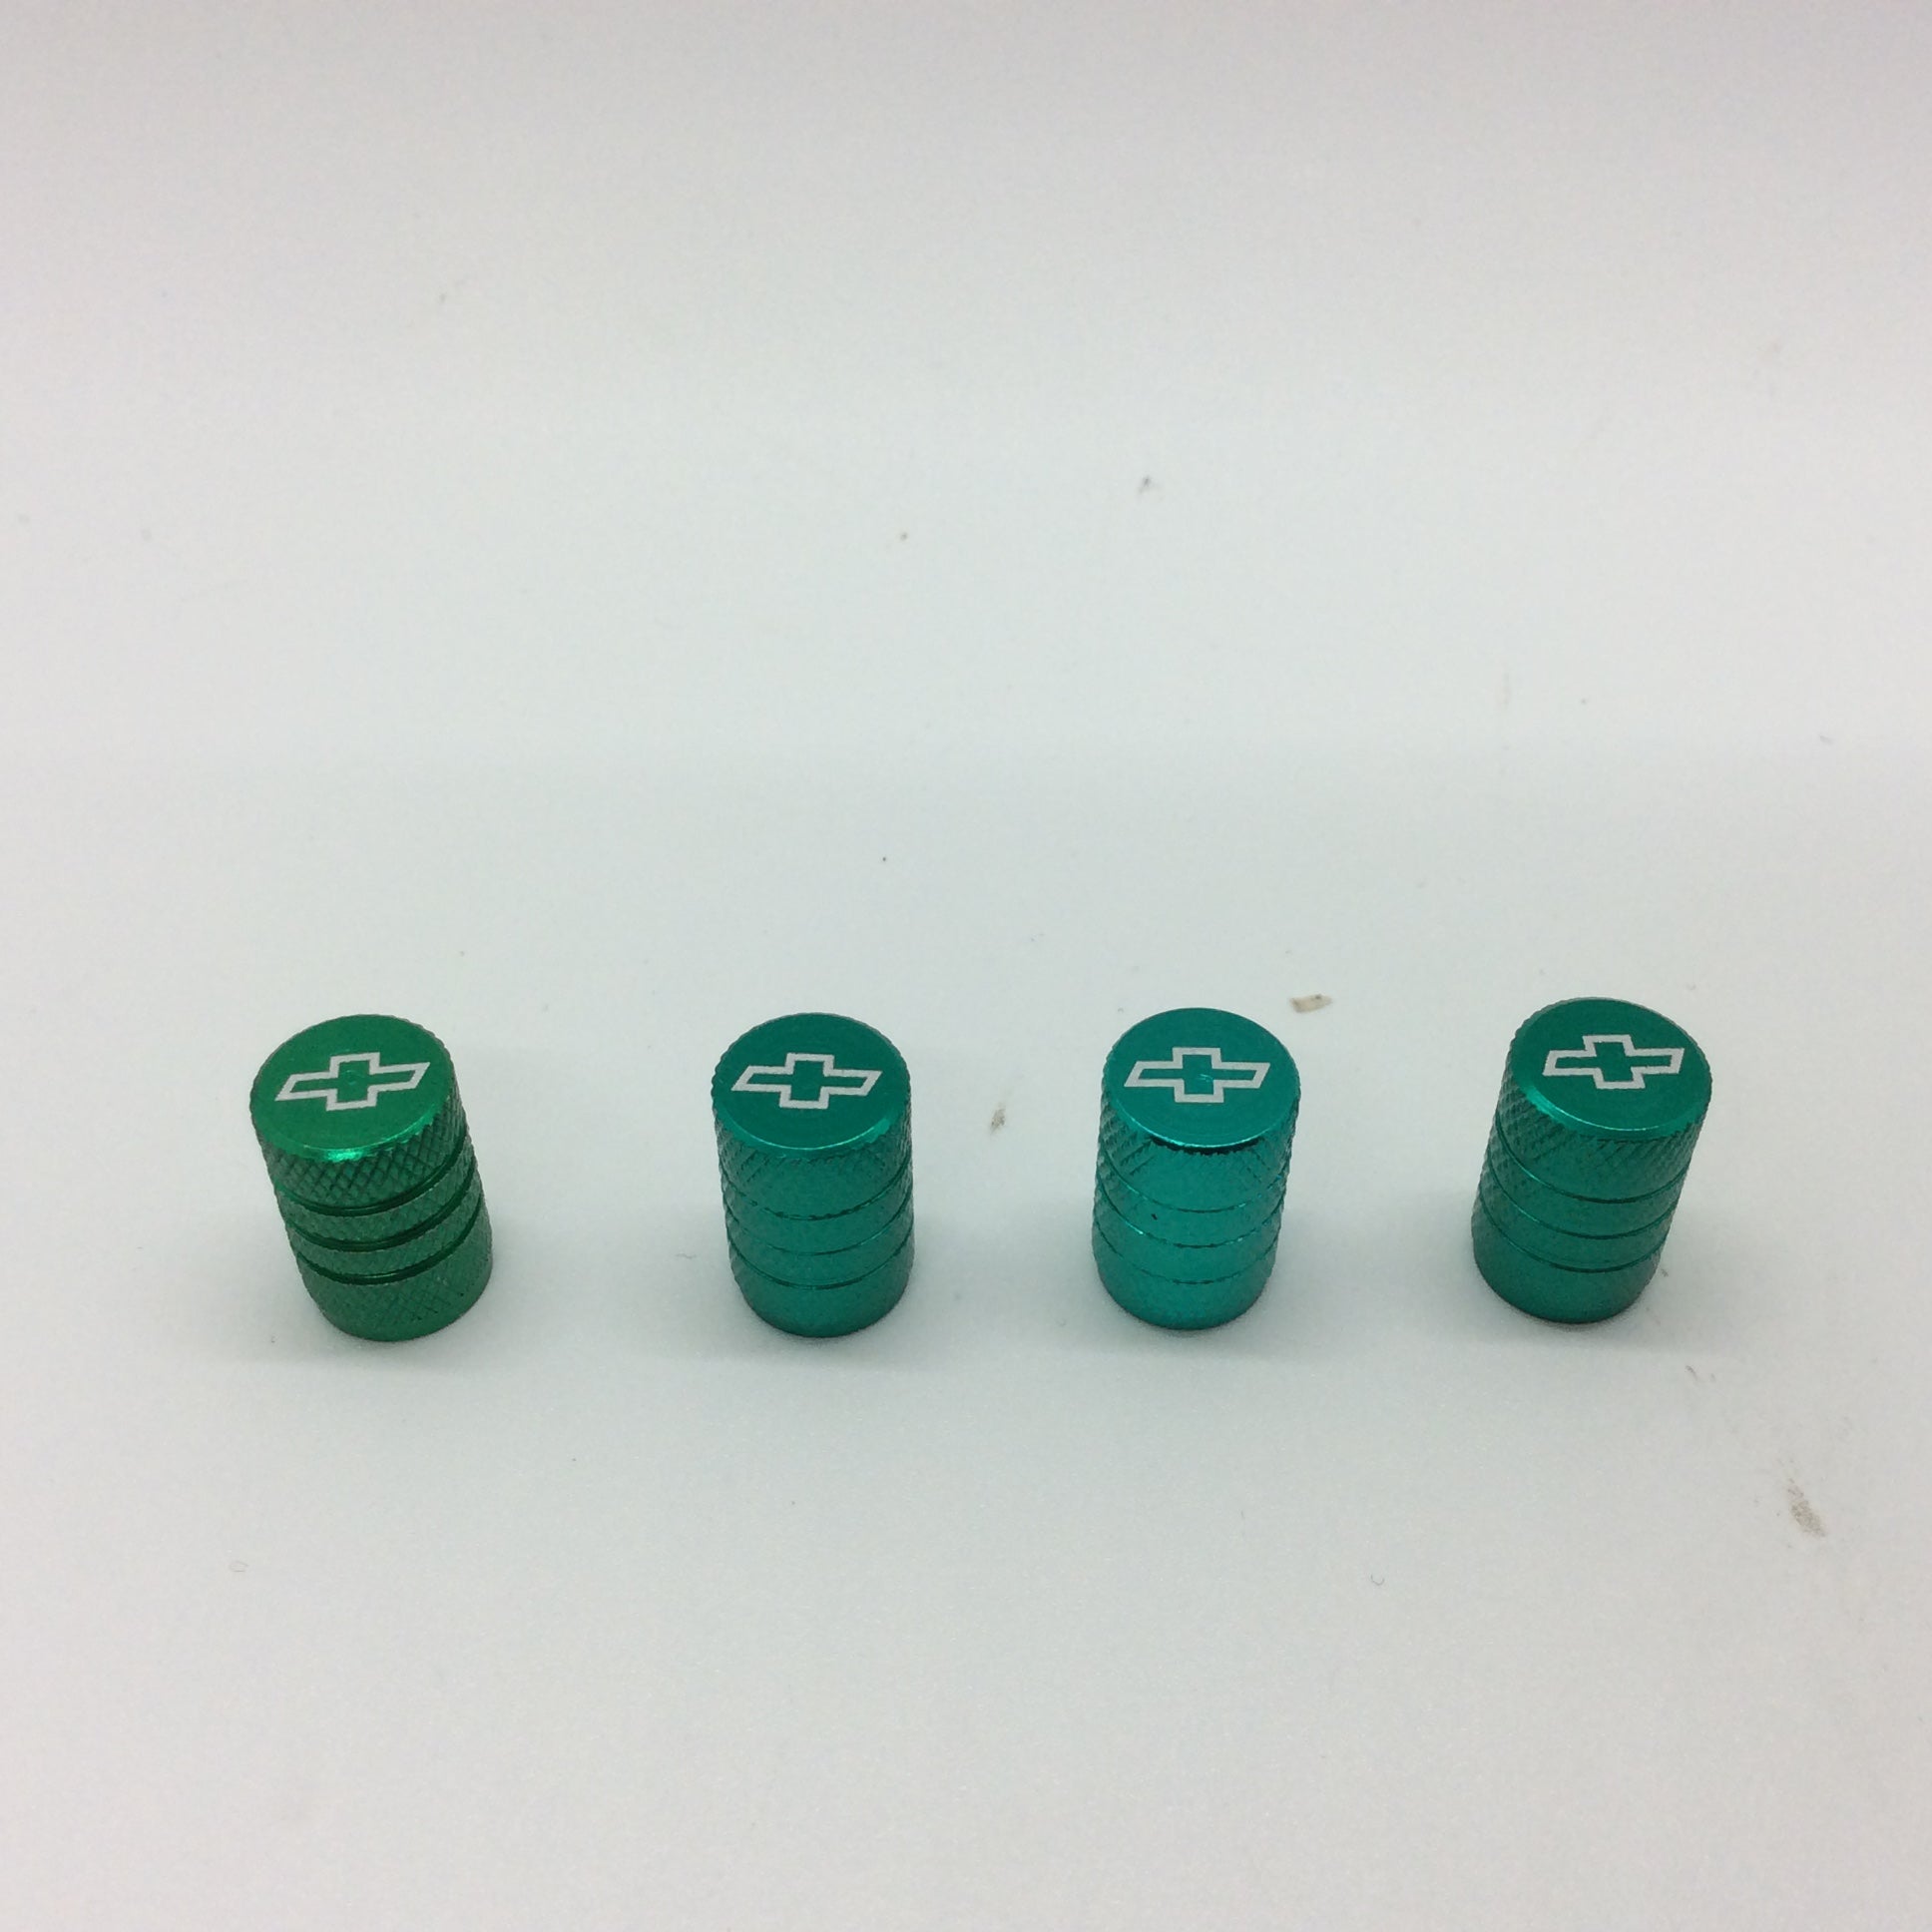 a set of four green tire stem caps sitting on top of a table